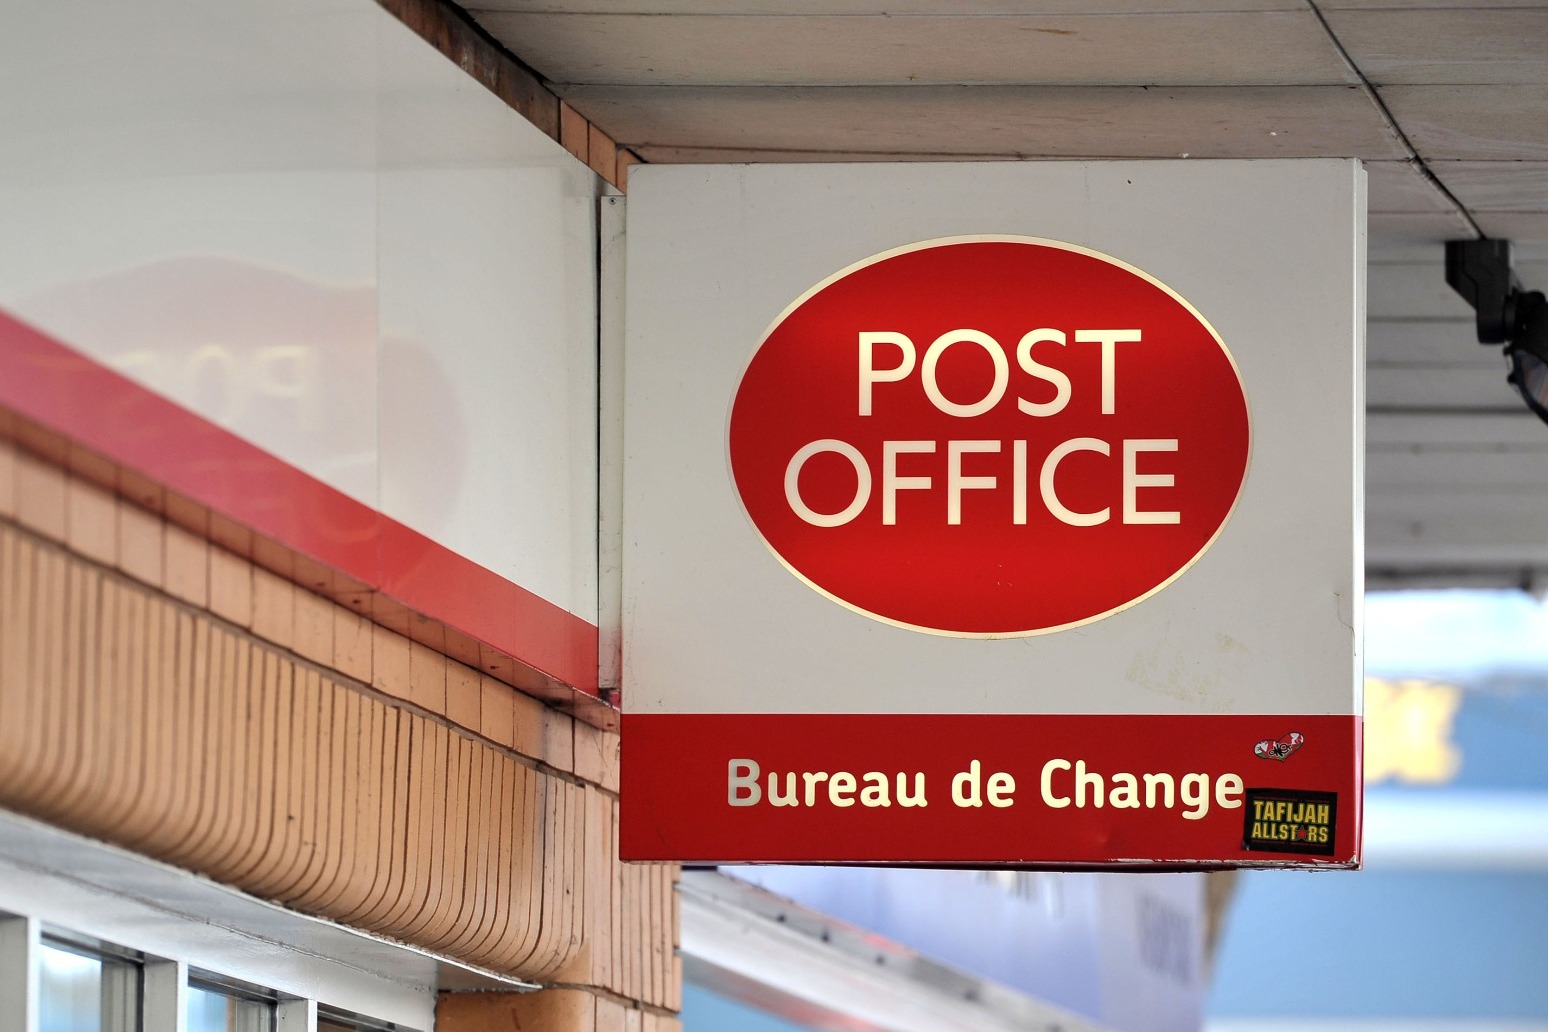 Record 323bn in cash handled by post offices in May